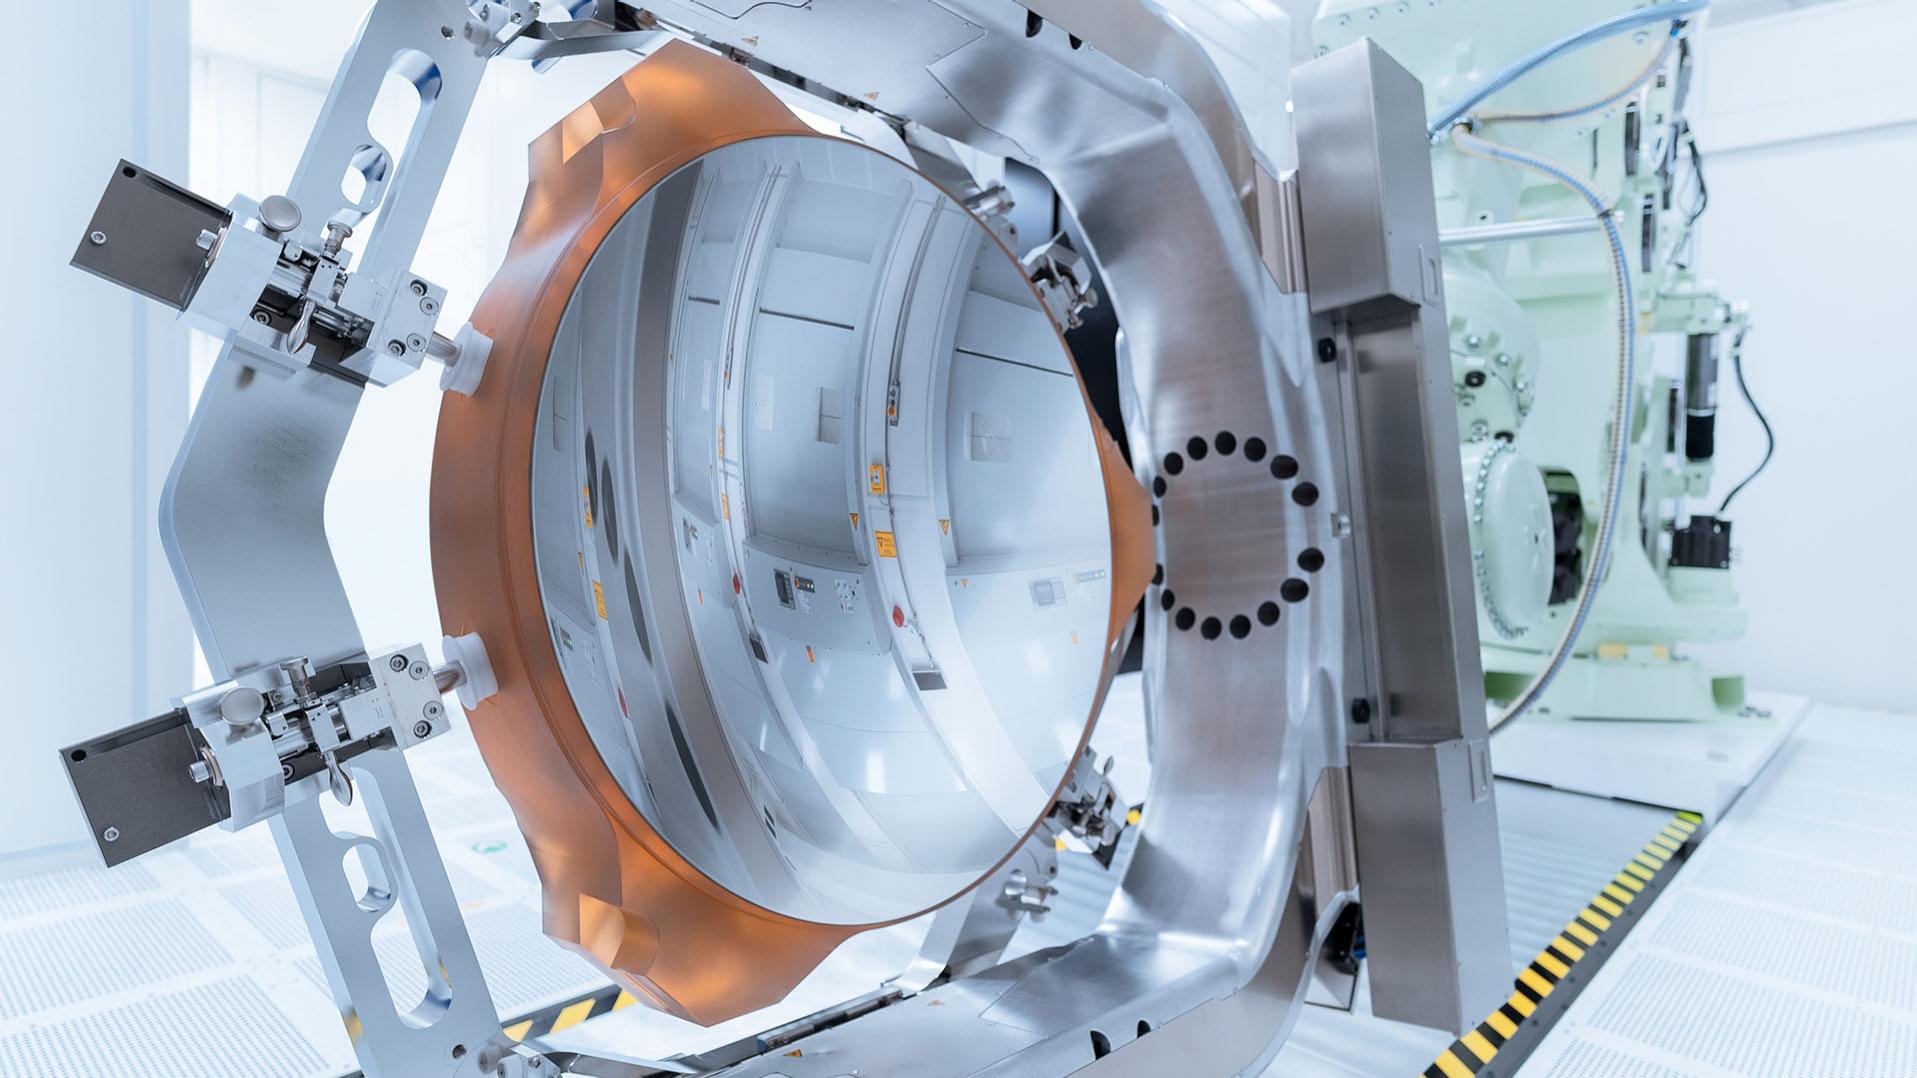 The world's most precise mirror from ZEISS is installed in the optical system for High-NA-EUV technology.